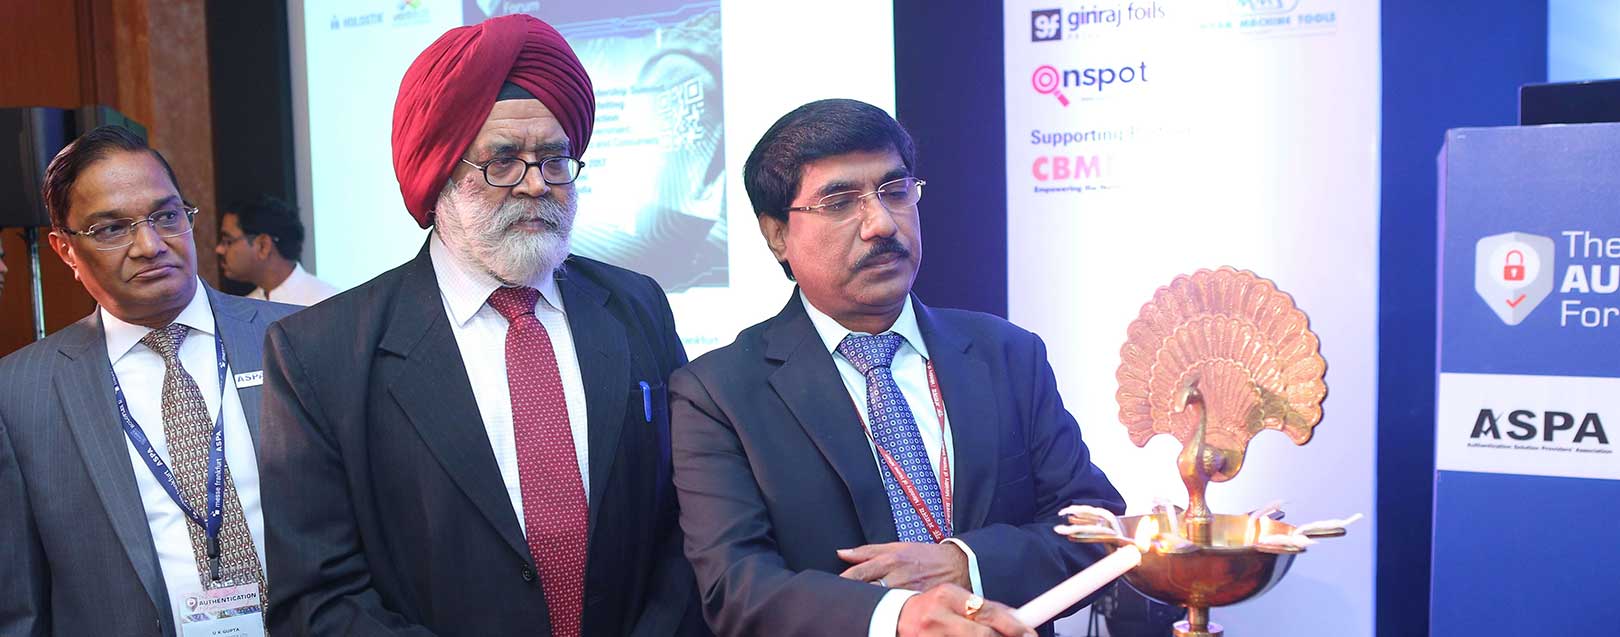 Authentication Forum targeting counterfeiting launched in New Delhi